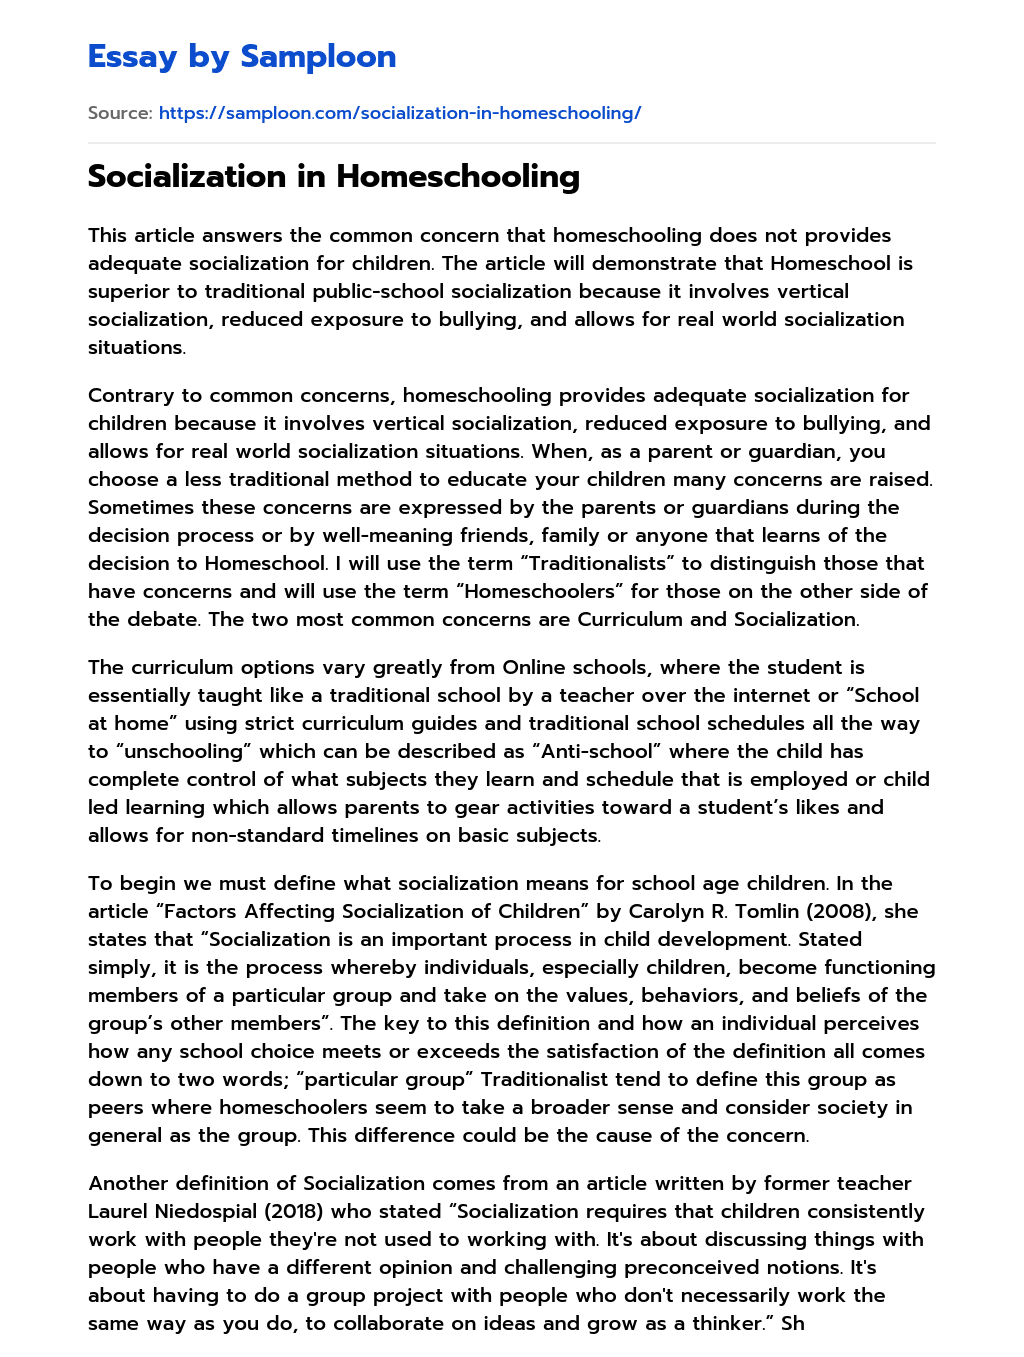 research essay on homeschooling